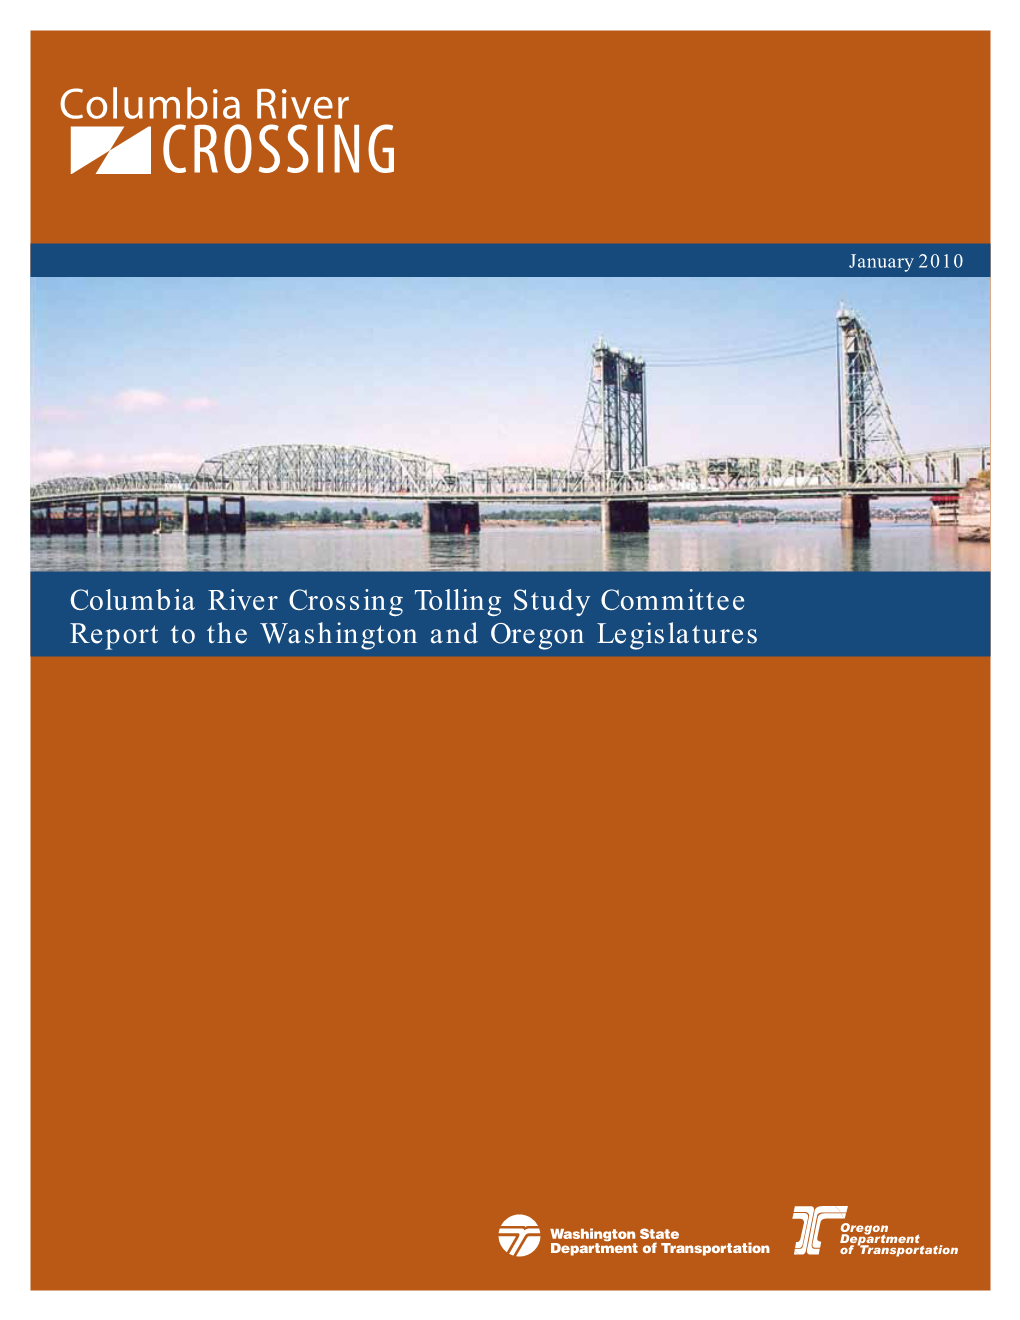 Columbia River Crossing Tolling Study Committee Report to the Washington and Oregon Legislatures Table of Contents